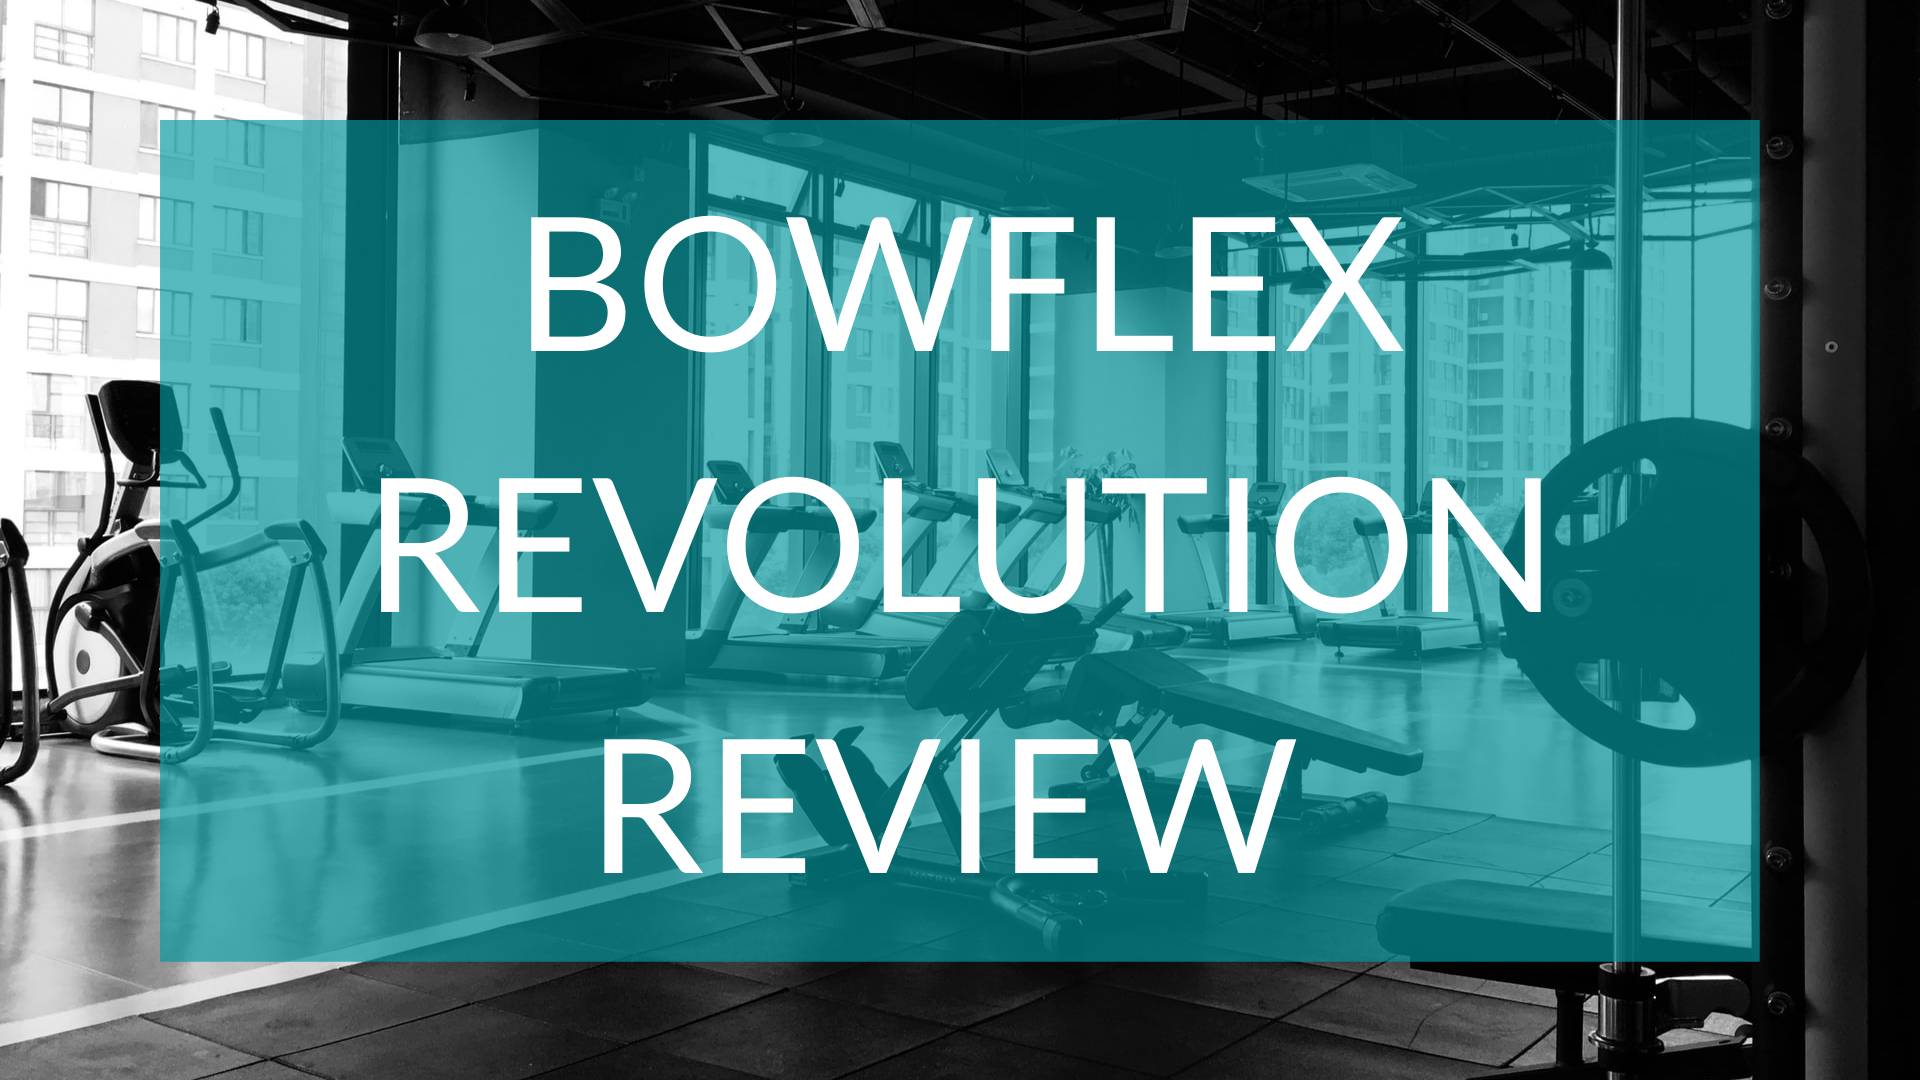 Bowflex Revolution Review text in front of gym background